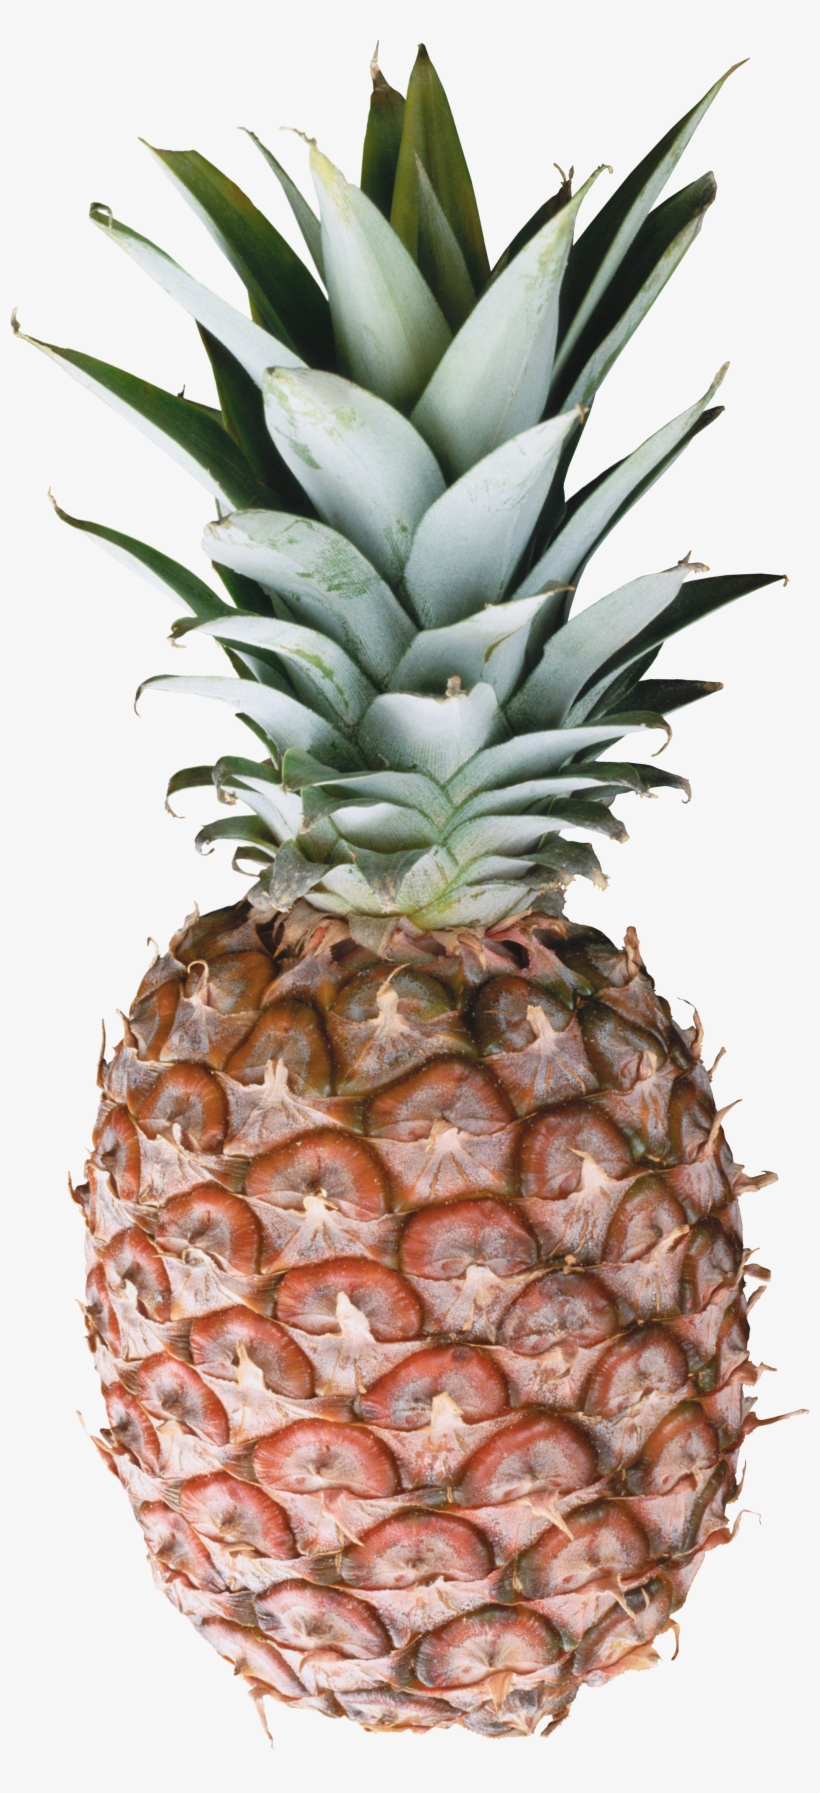 Pineapple Png Image, Free Download - Pineapple Png, transparent png #83893